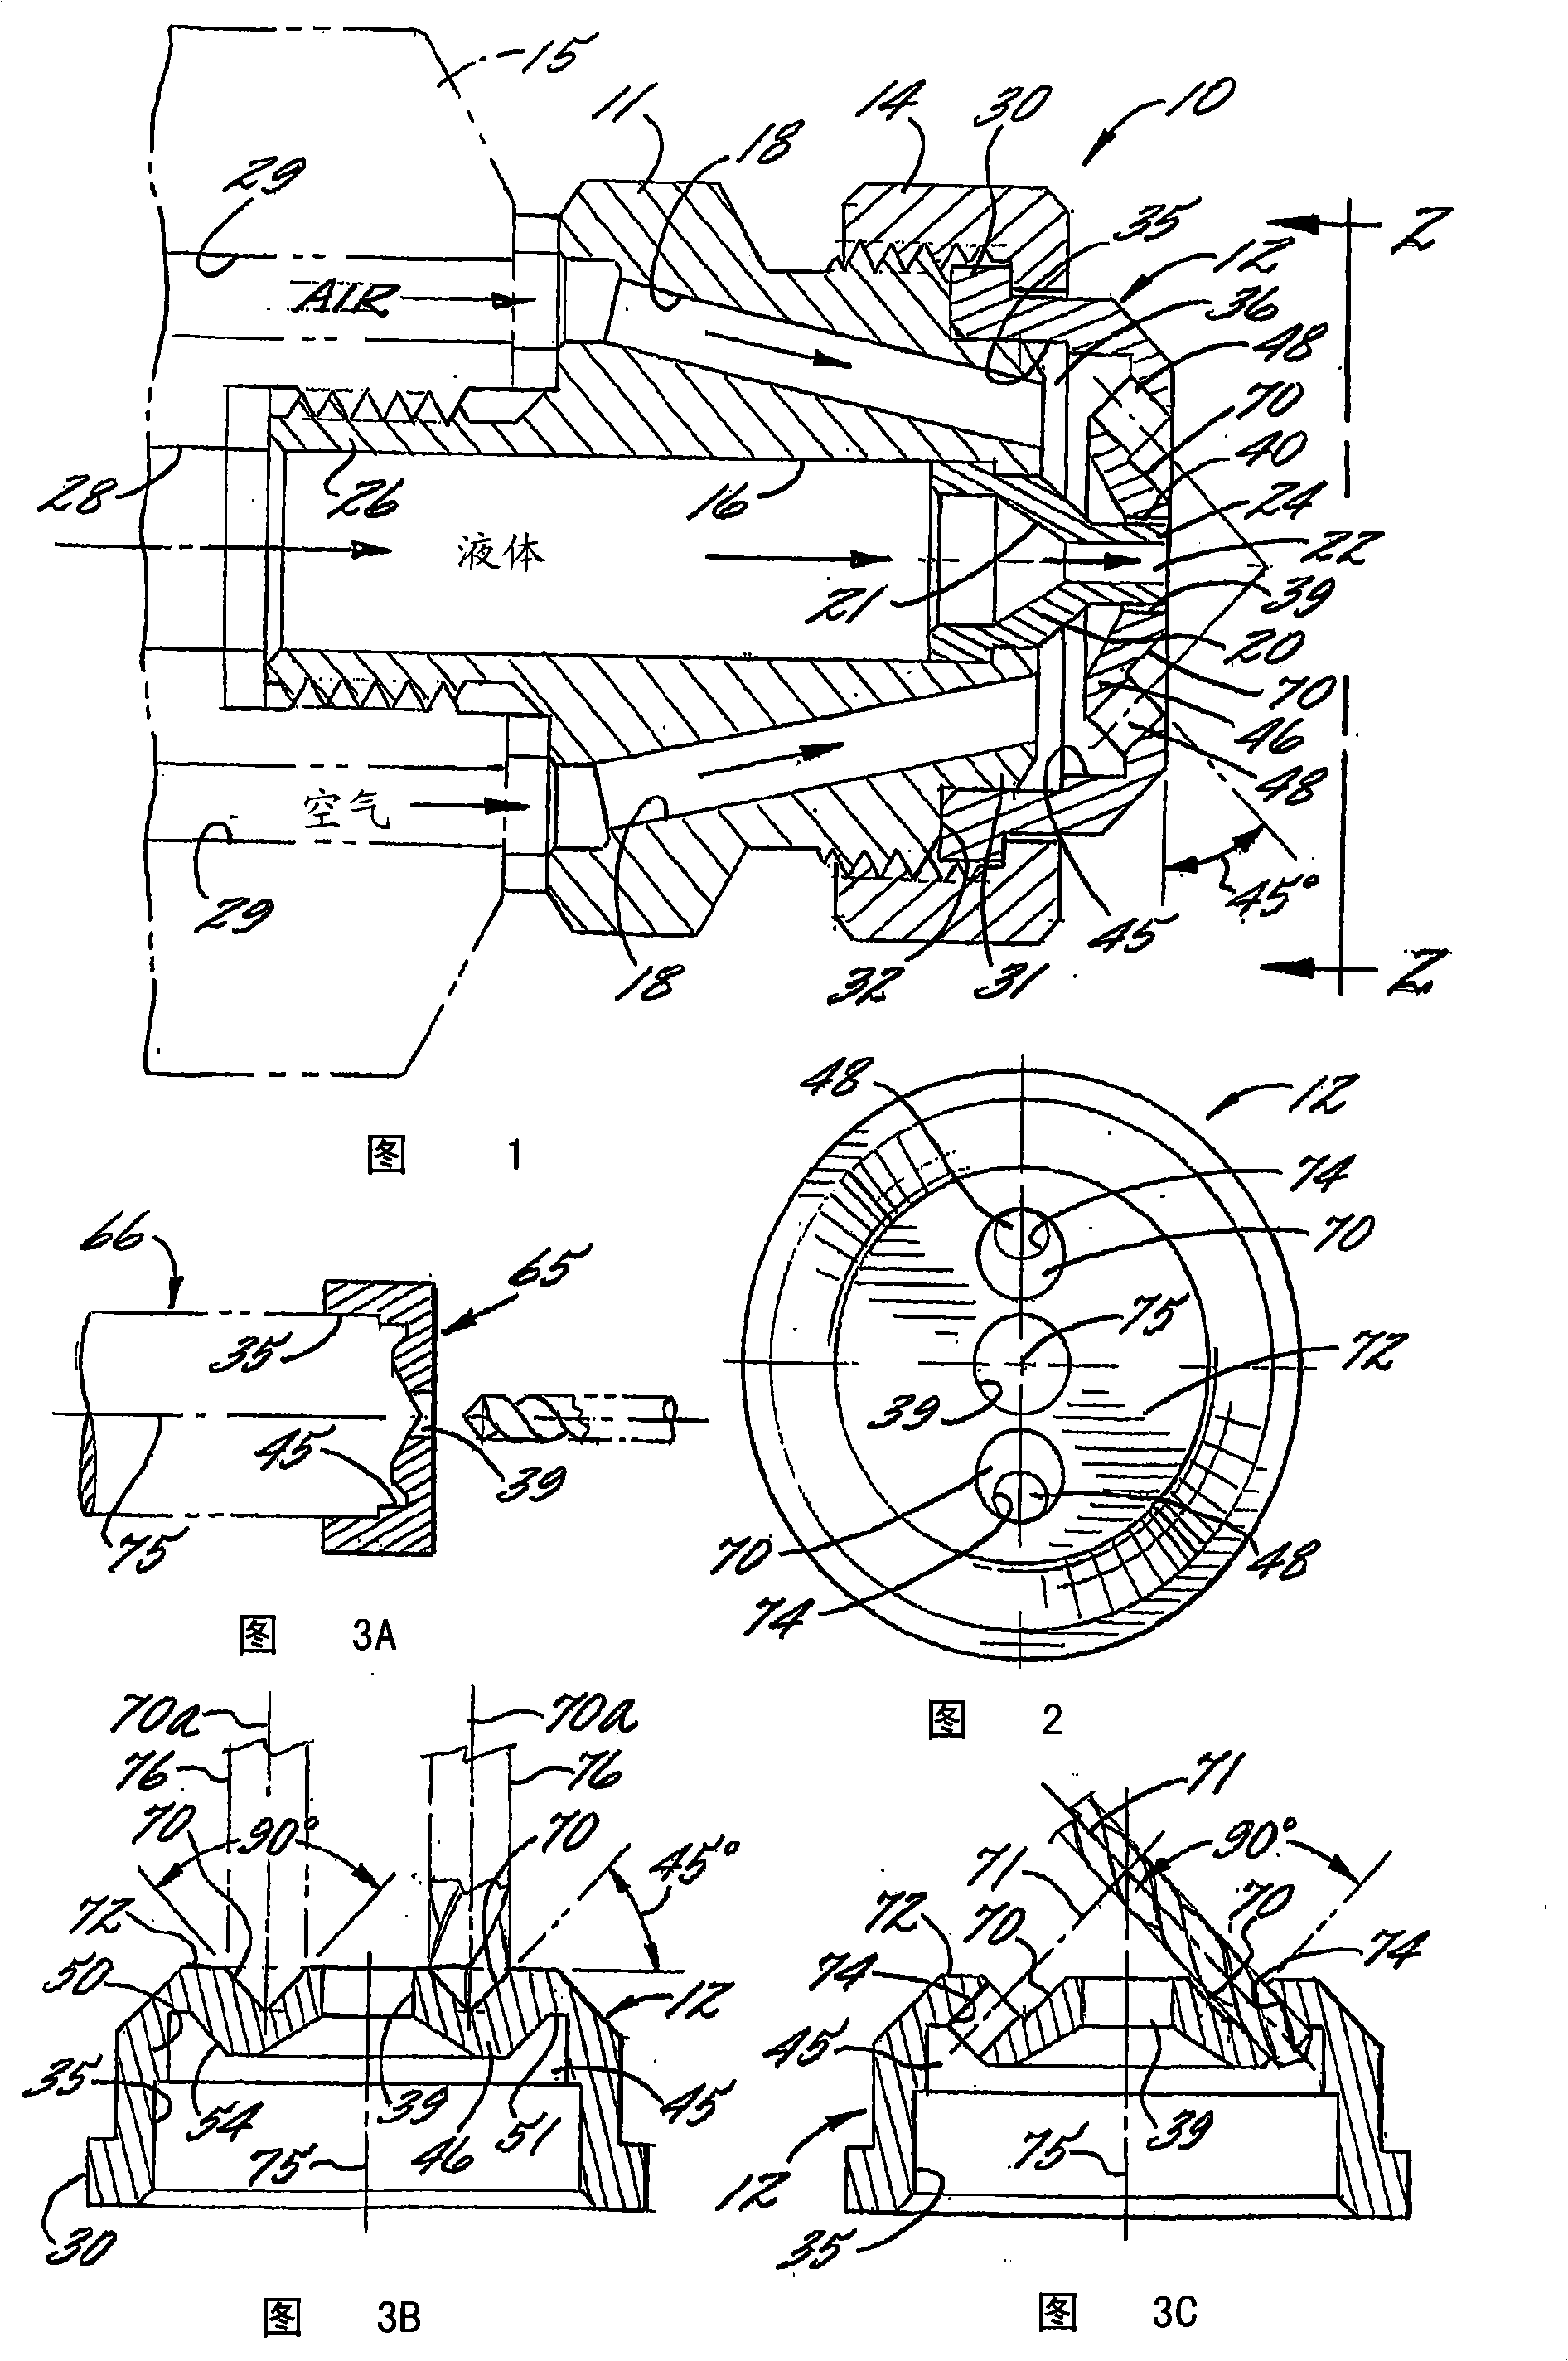 Improved external mix air atomizing spray nozzle assembly